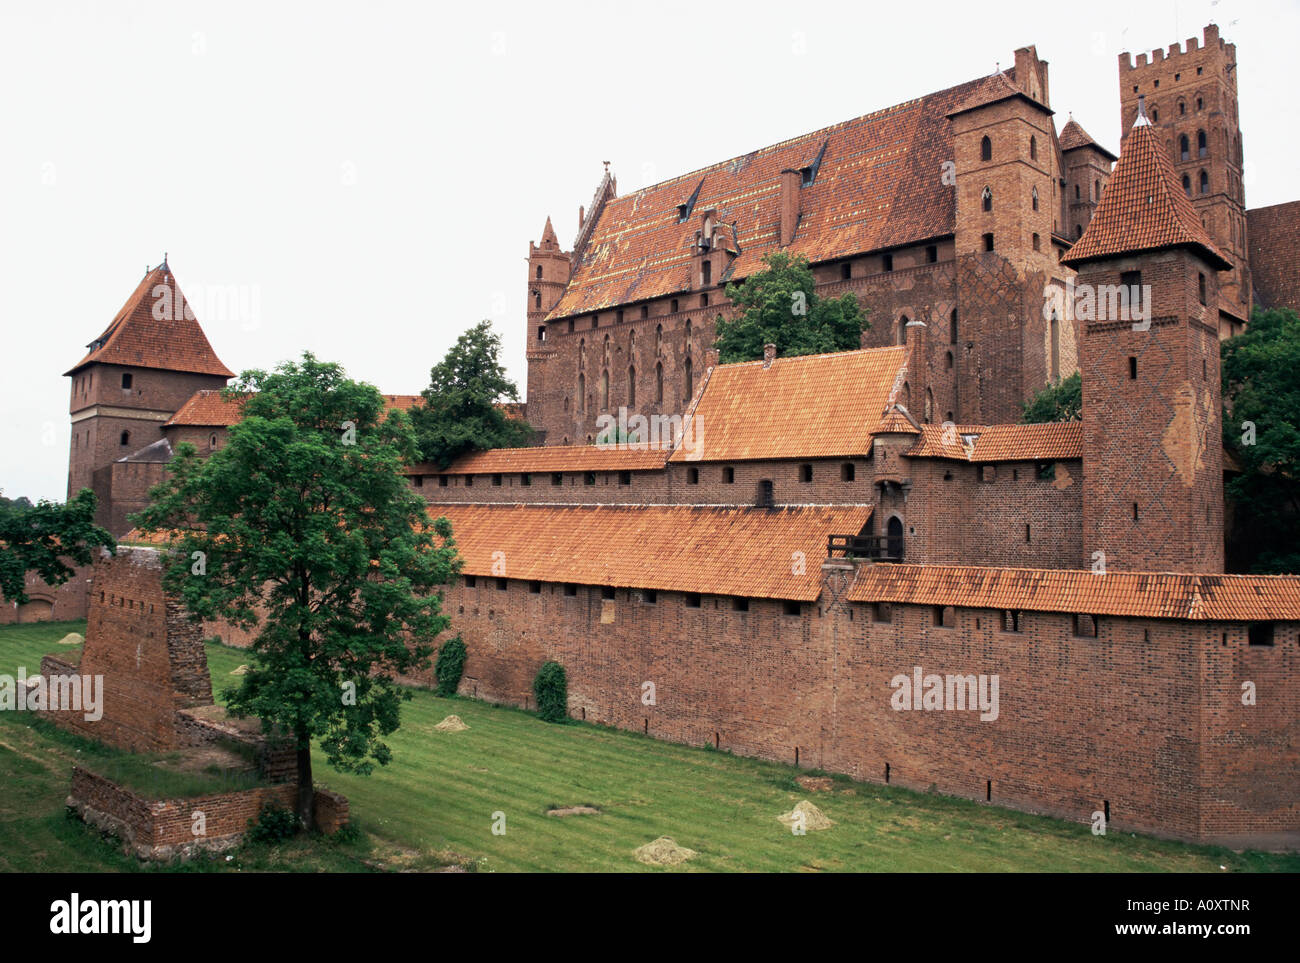 Malbork Castle built by Teutonic knights and dating from the 13th century UNESCO World Heritage Site Pomerania Poland Europe Stock Photo